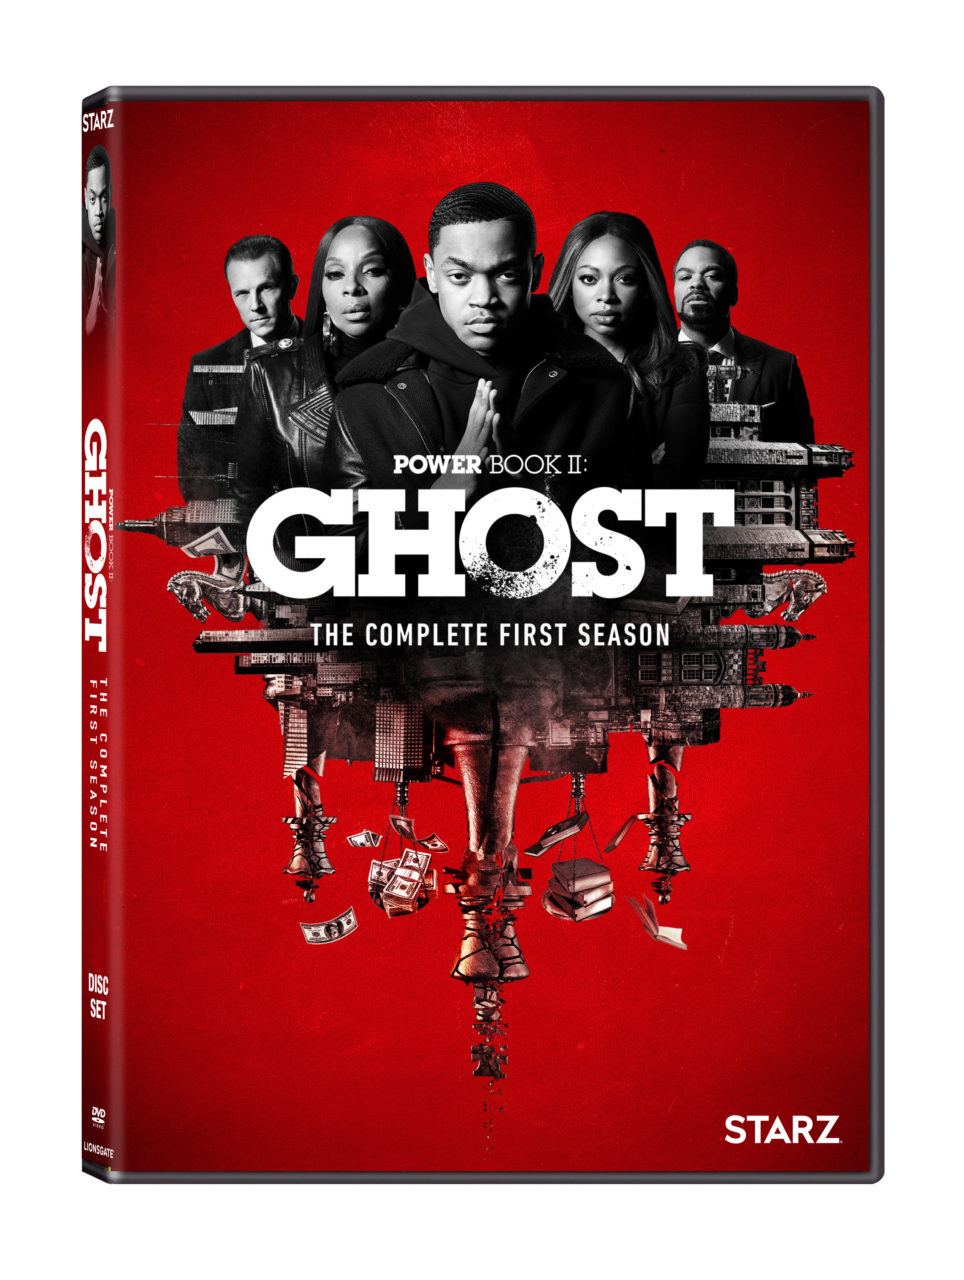 Power Book II: Ghost DVD cover (Lionsgate)